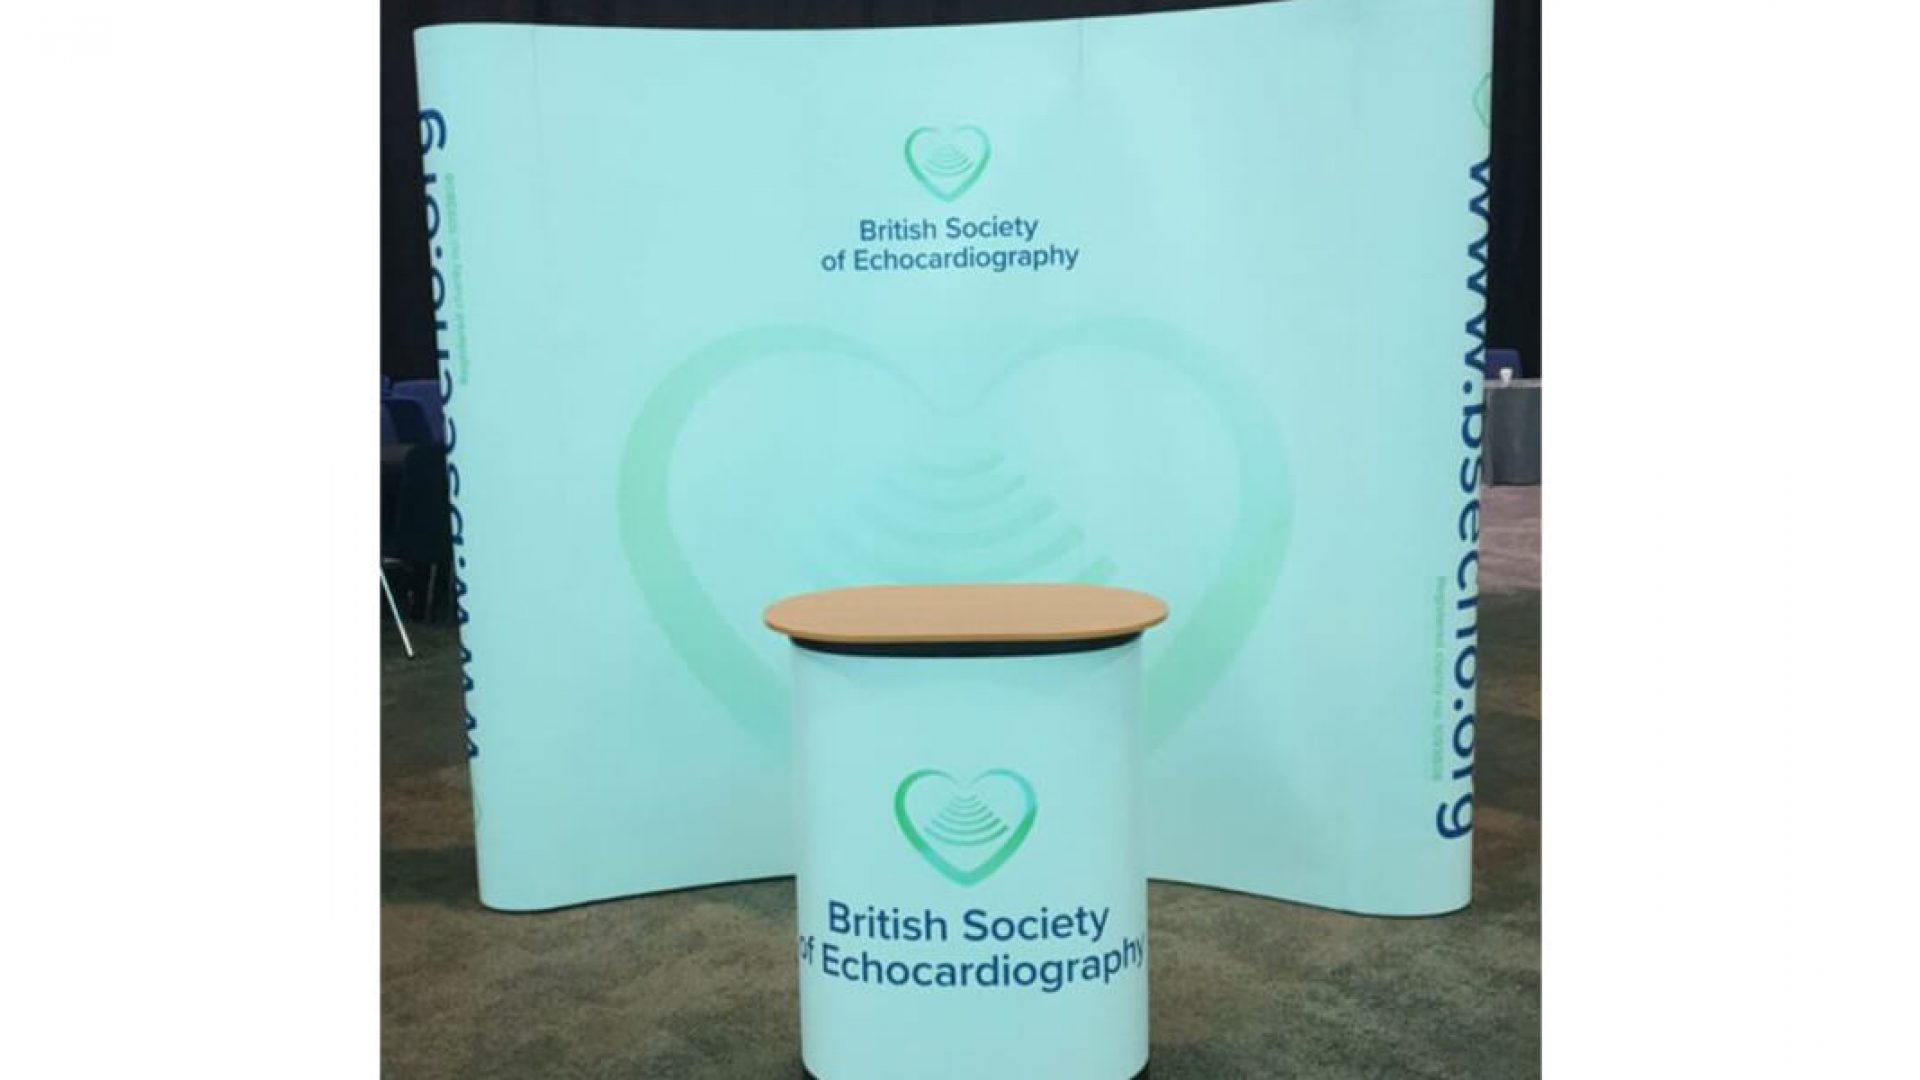 British Society of Echocardiography Conference Filming